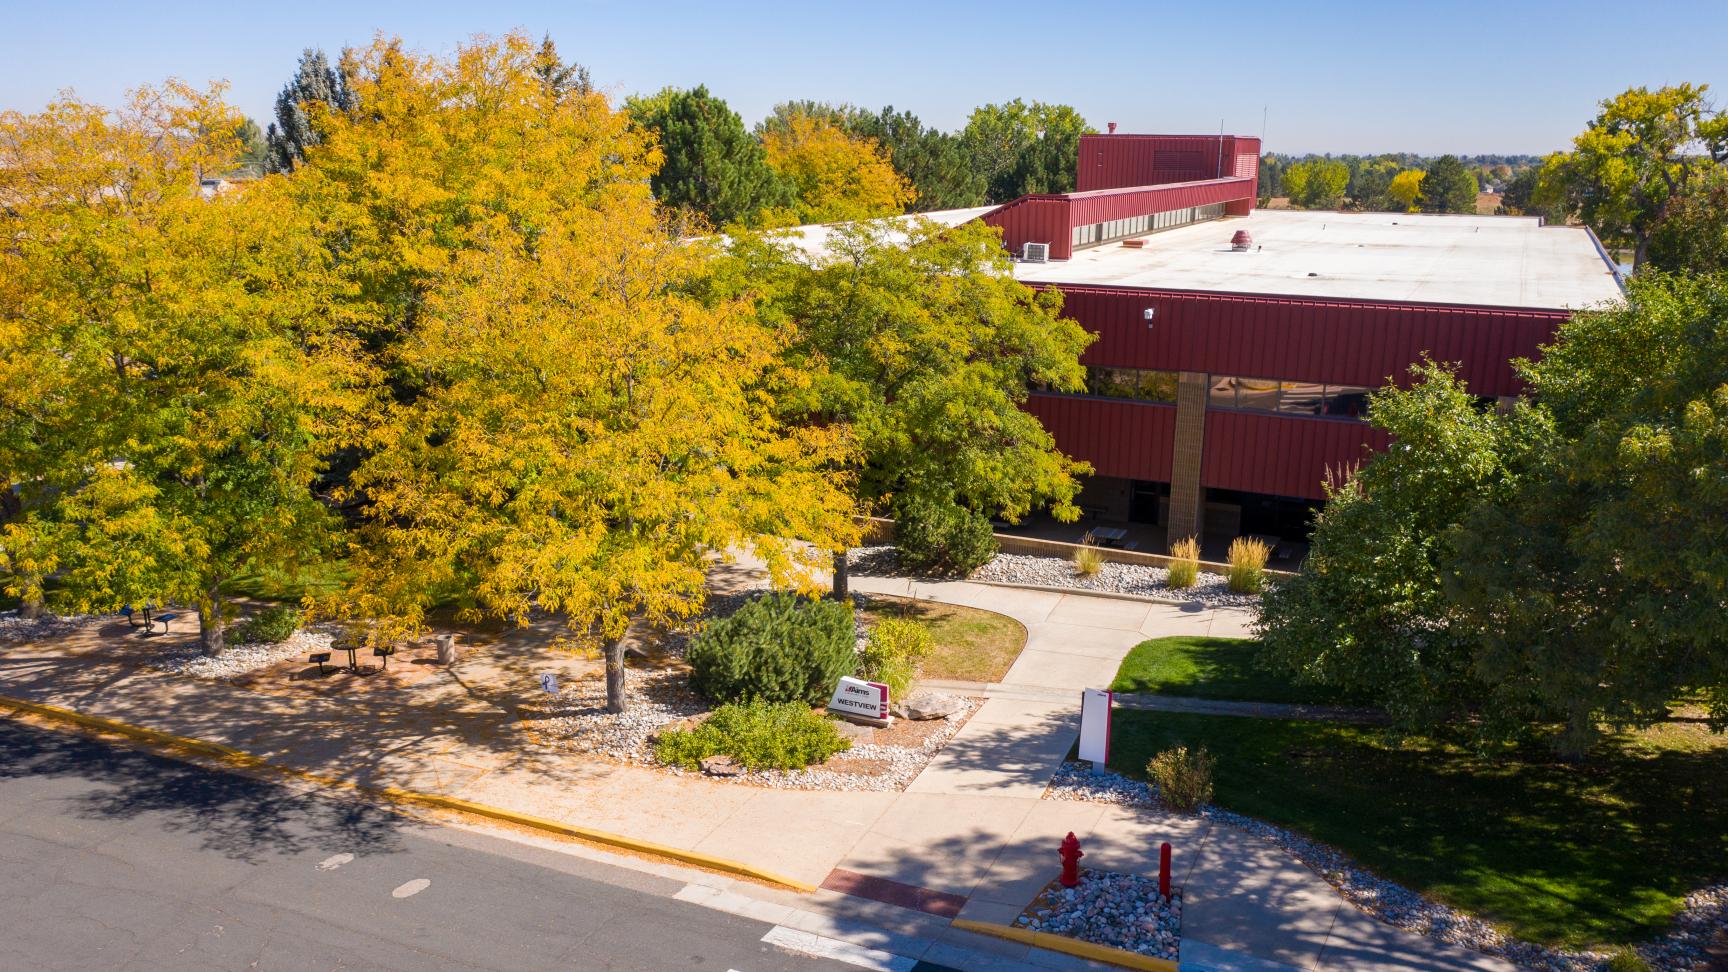 The Aims Greeley campus during autumn